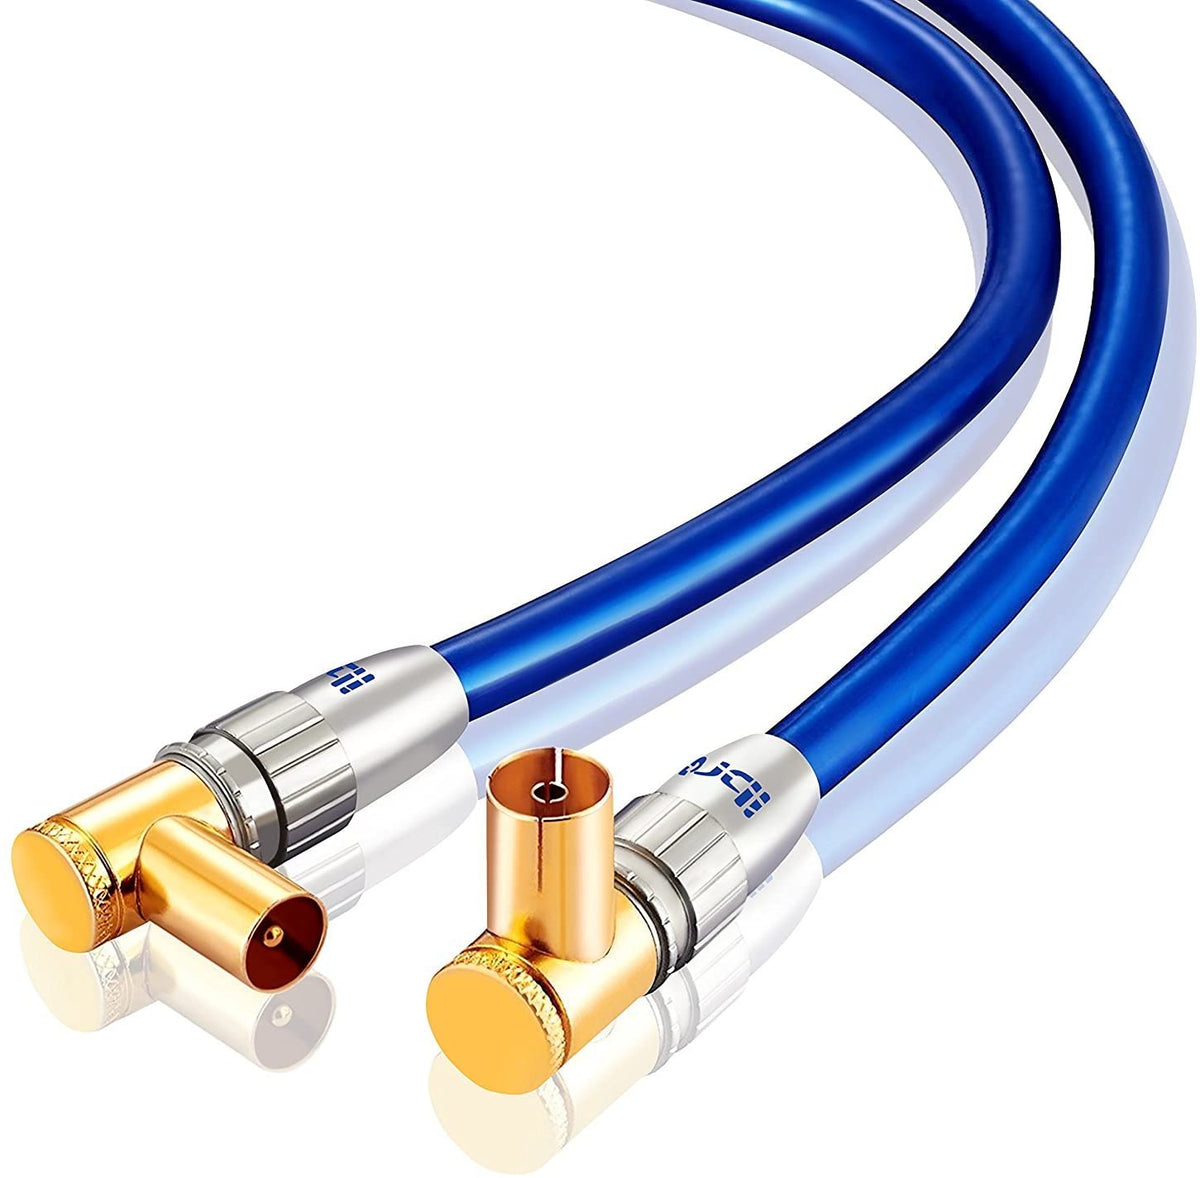 Premium RF Right Angle TV Aerial Freeview Plug Video Cable & Coupler GOLD 0.5m - IBRA Blue Gold